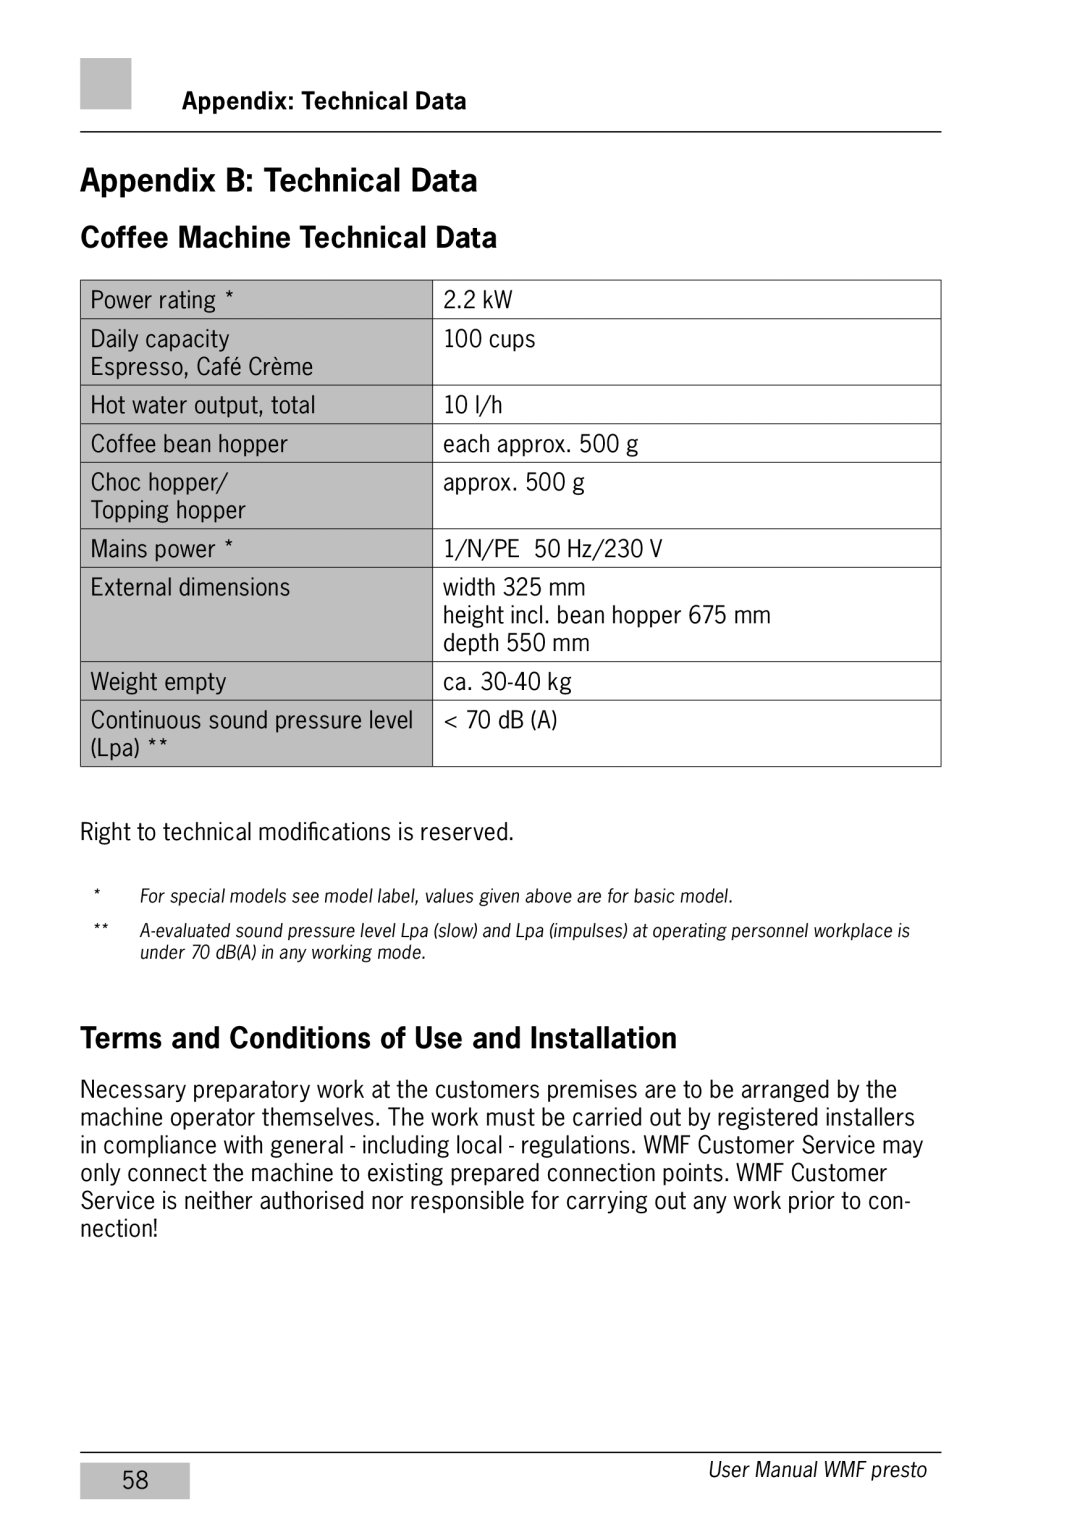 WMF Americas 1400 Appendix B Technical Data, Coffee Machine Technical Data, Terms and Conditions of Use and Installation 